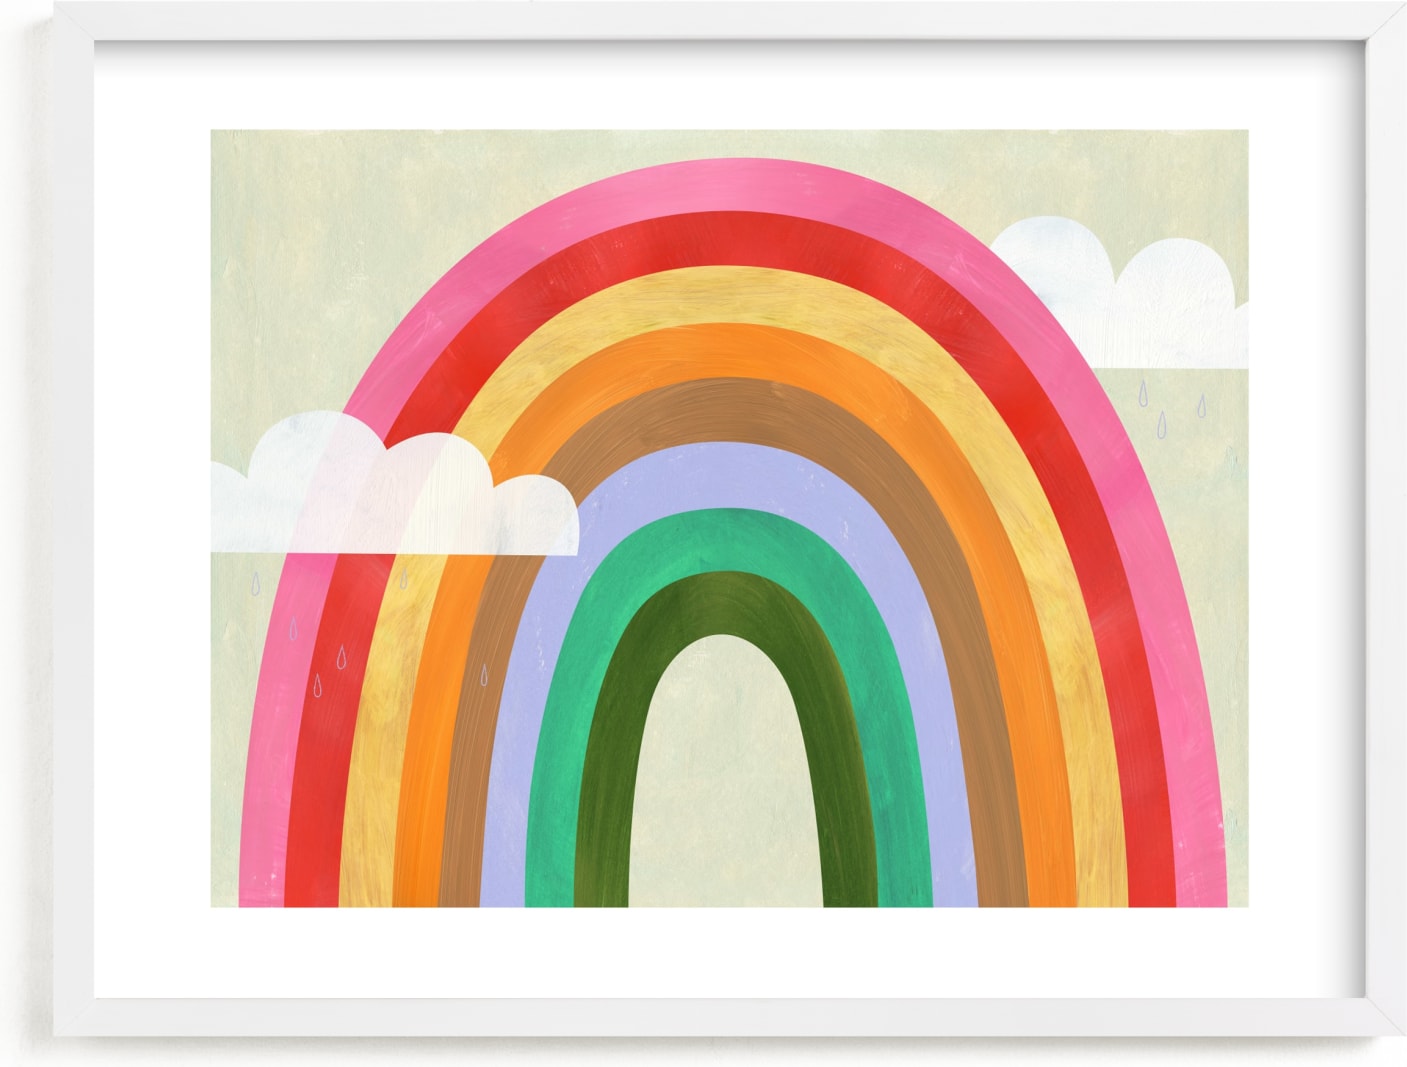 This is a colorful kids wall art by melanie mikecz called Rainbow & Clouds.